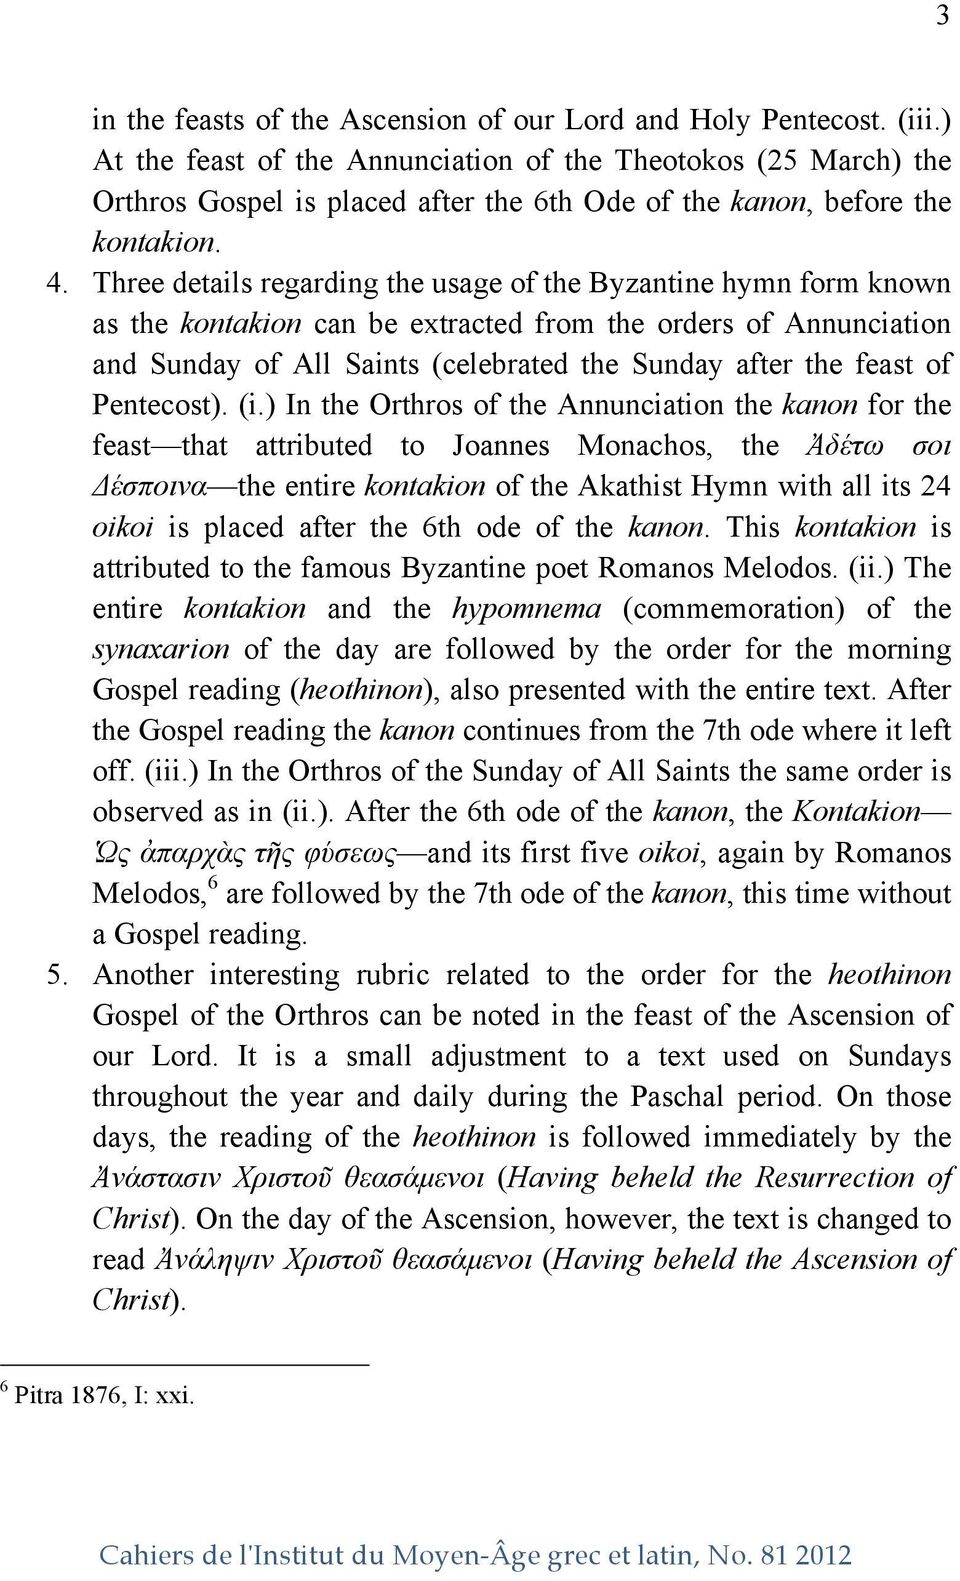 Three details regarding the usage of the Byzantine hymn form known as the kontakion can be extracted from the orders of Annunciation and Sunday of All Saints (celebrated the Sunday after the feast of